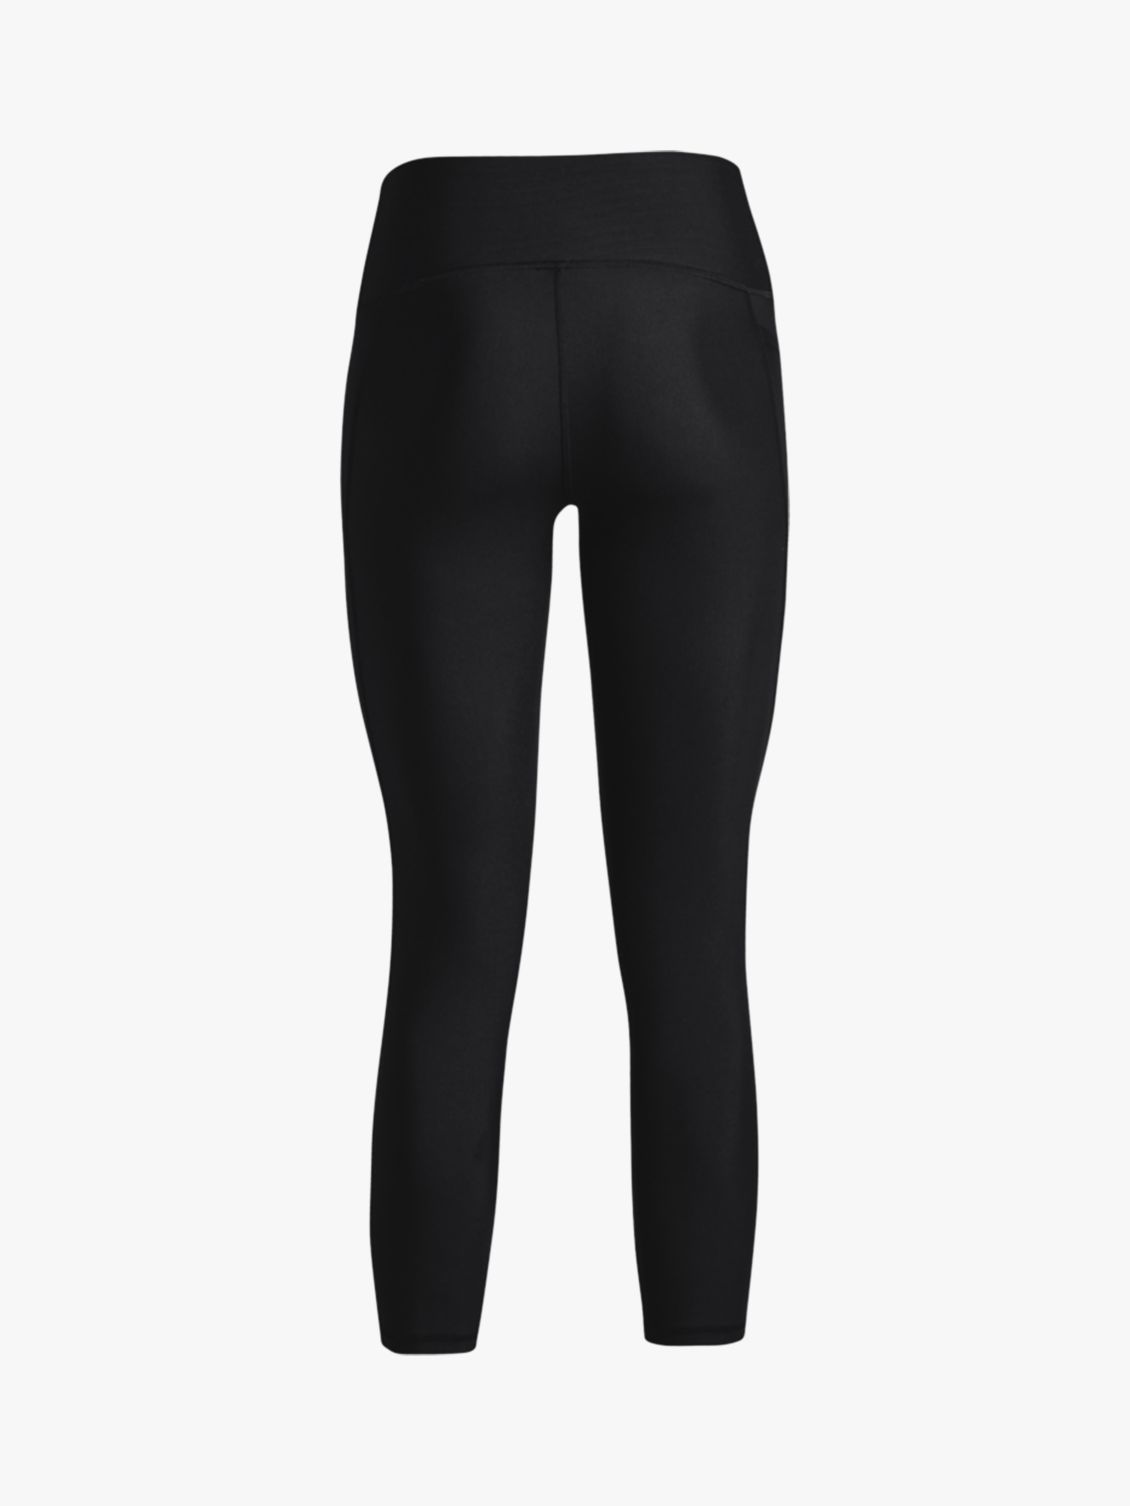 Under Armour Novelty Women's Tennis Tights - Royal/Black